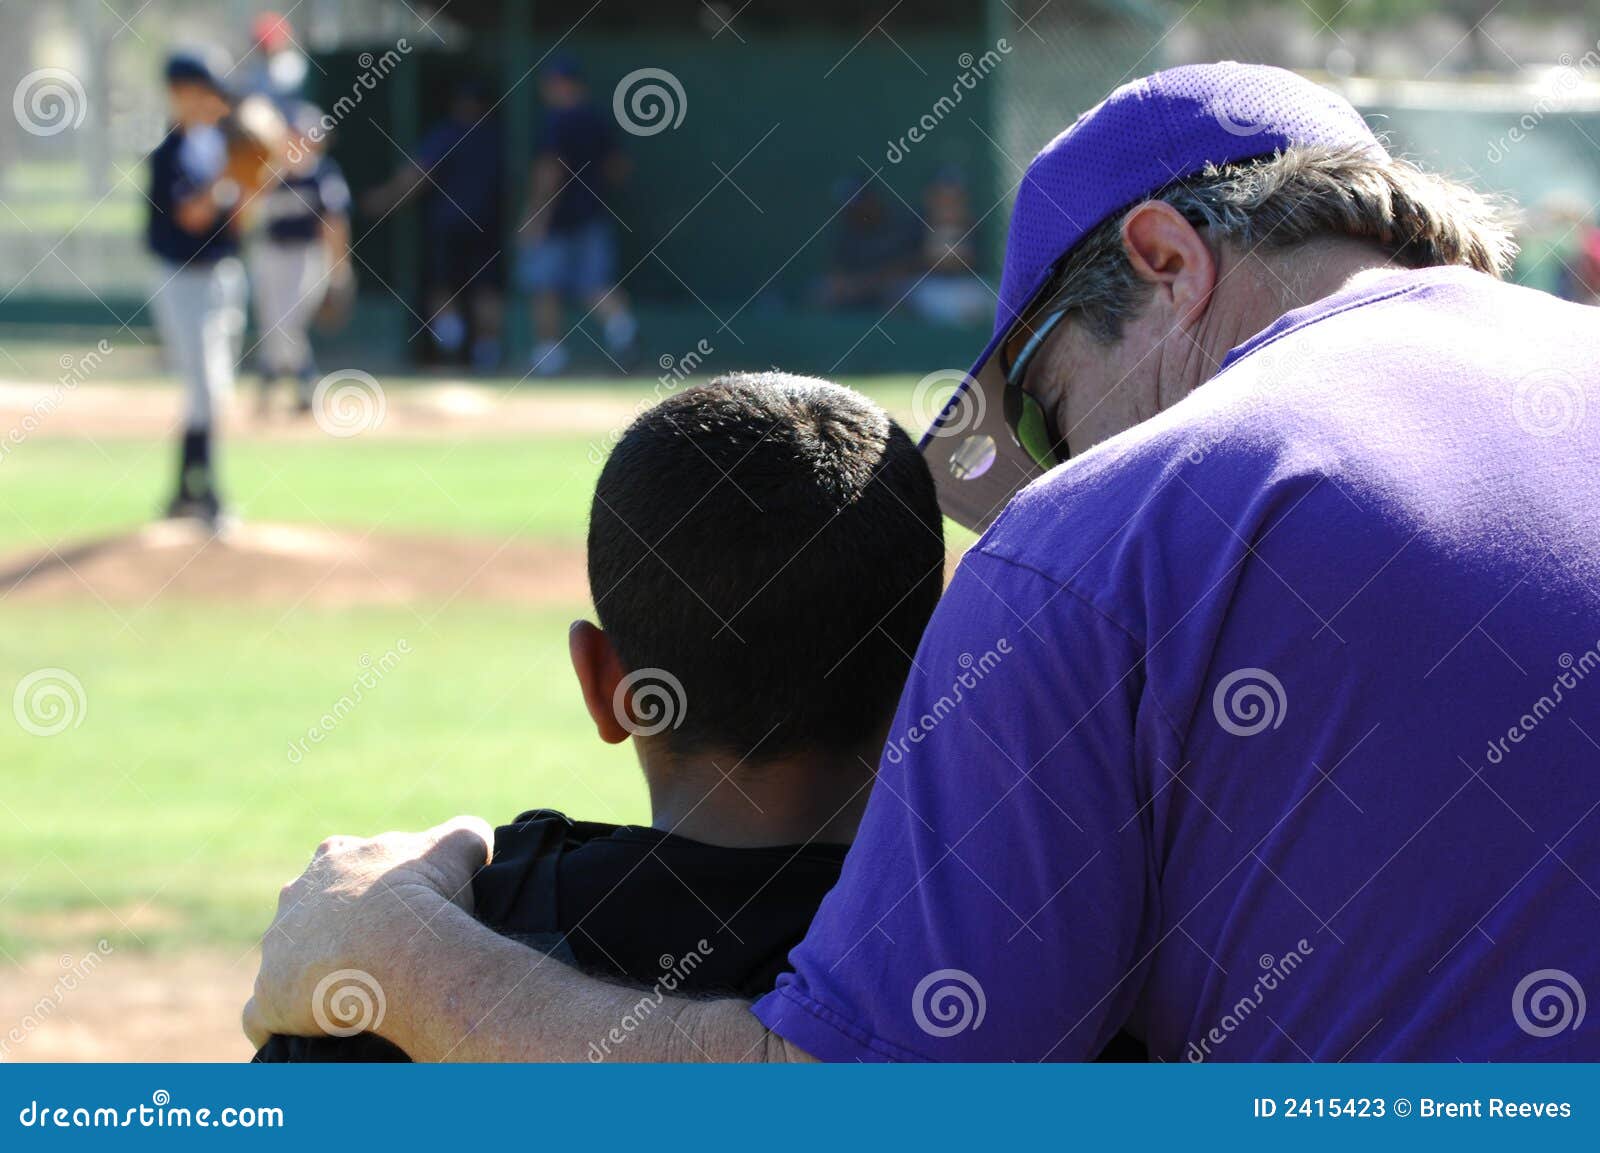 coach consoles player